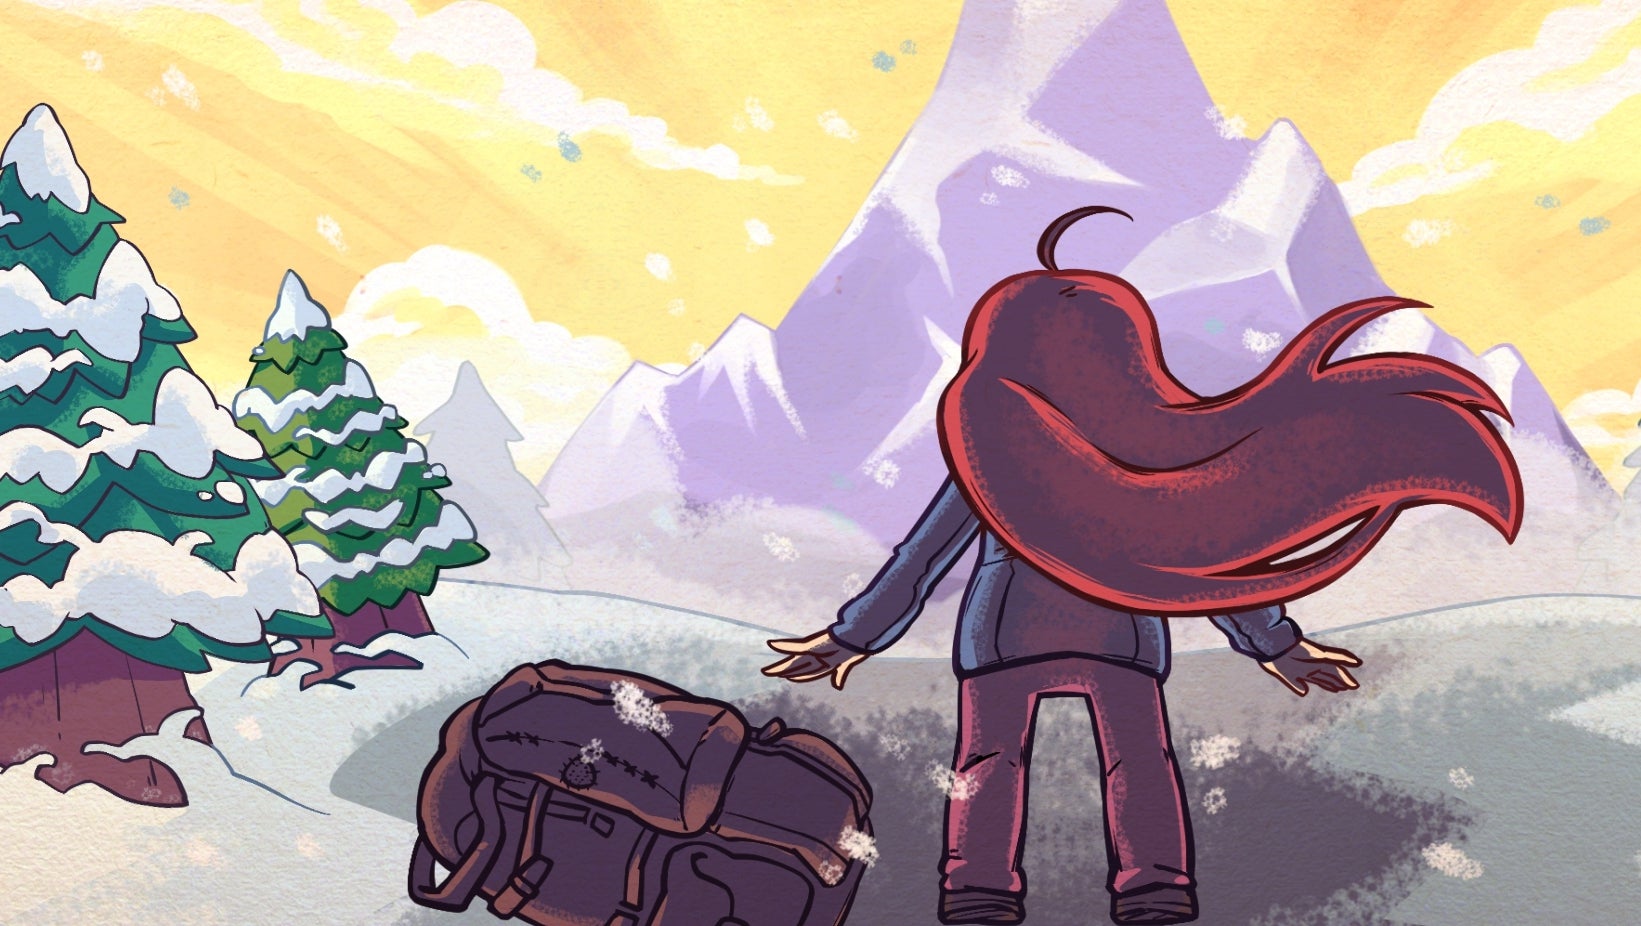 Image for New "very hard" levels are coming to Celeste in early 2019